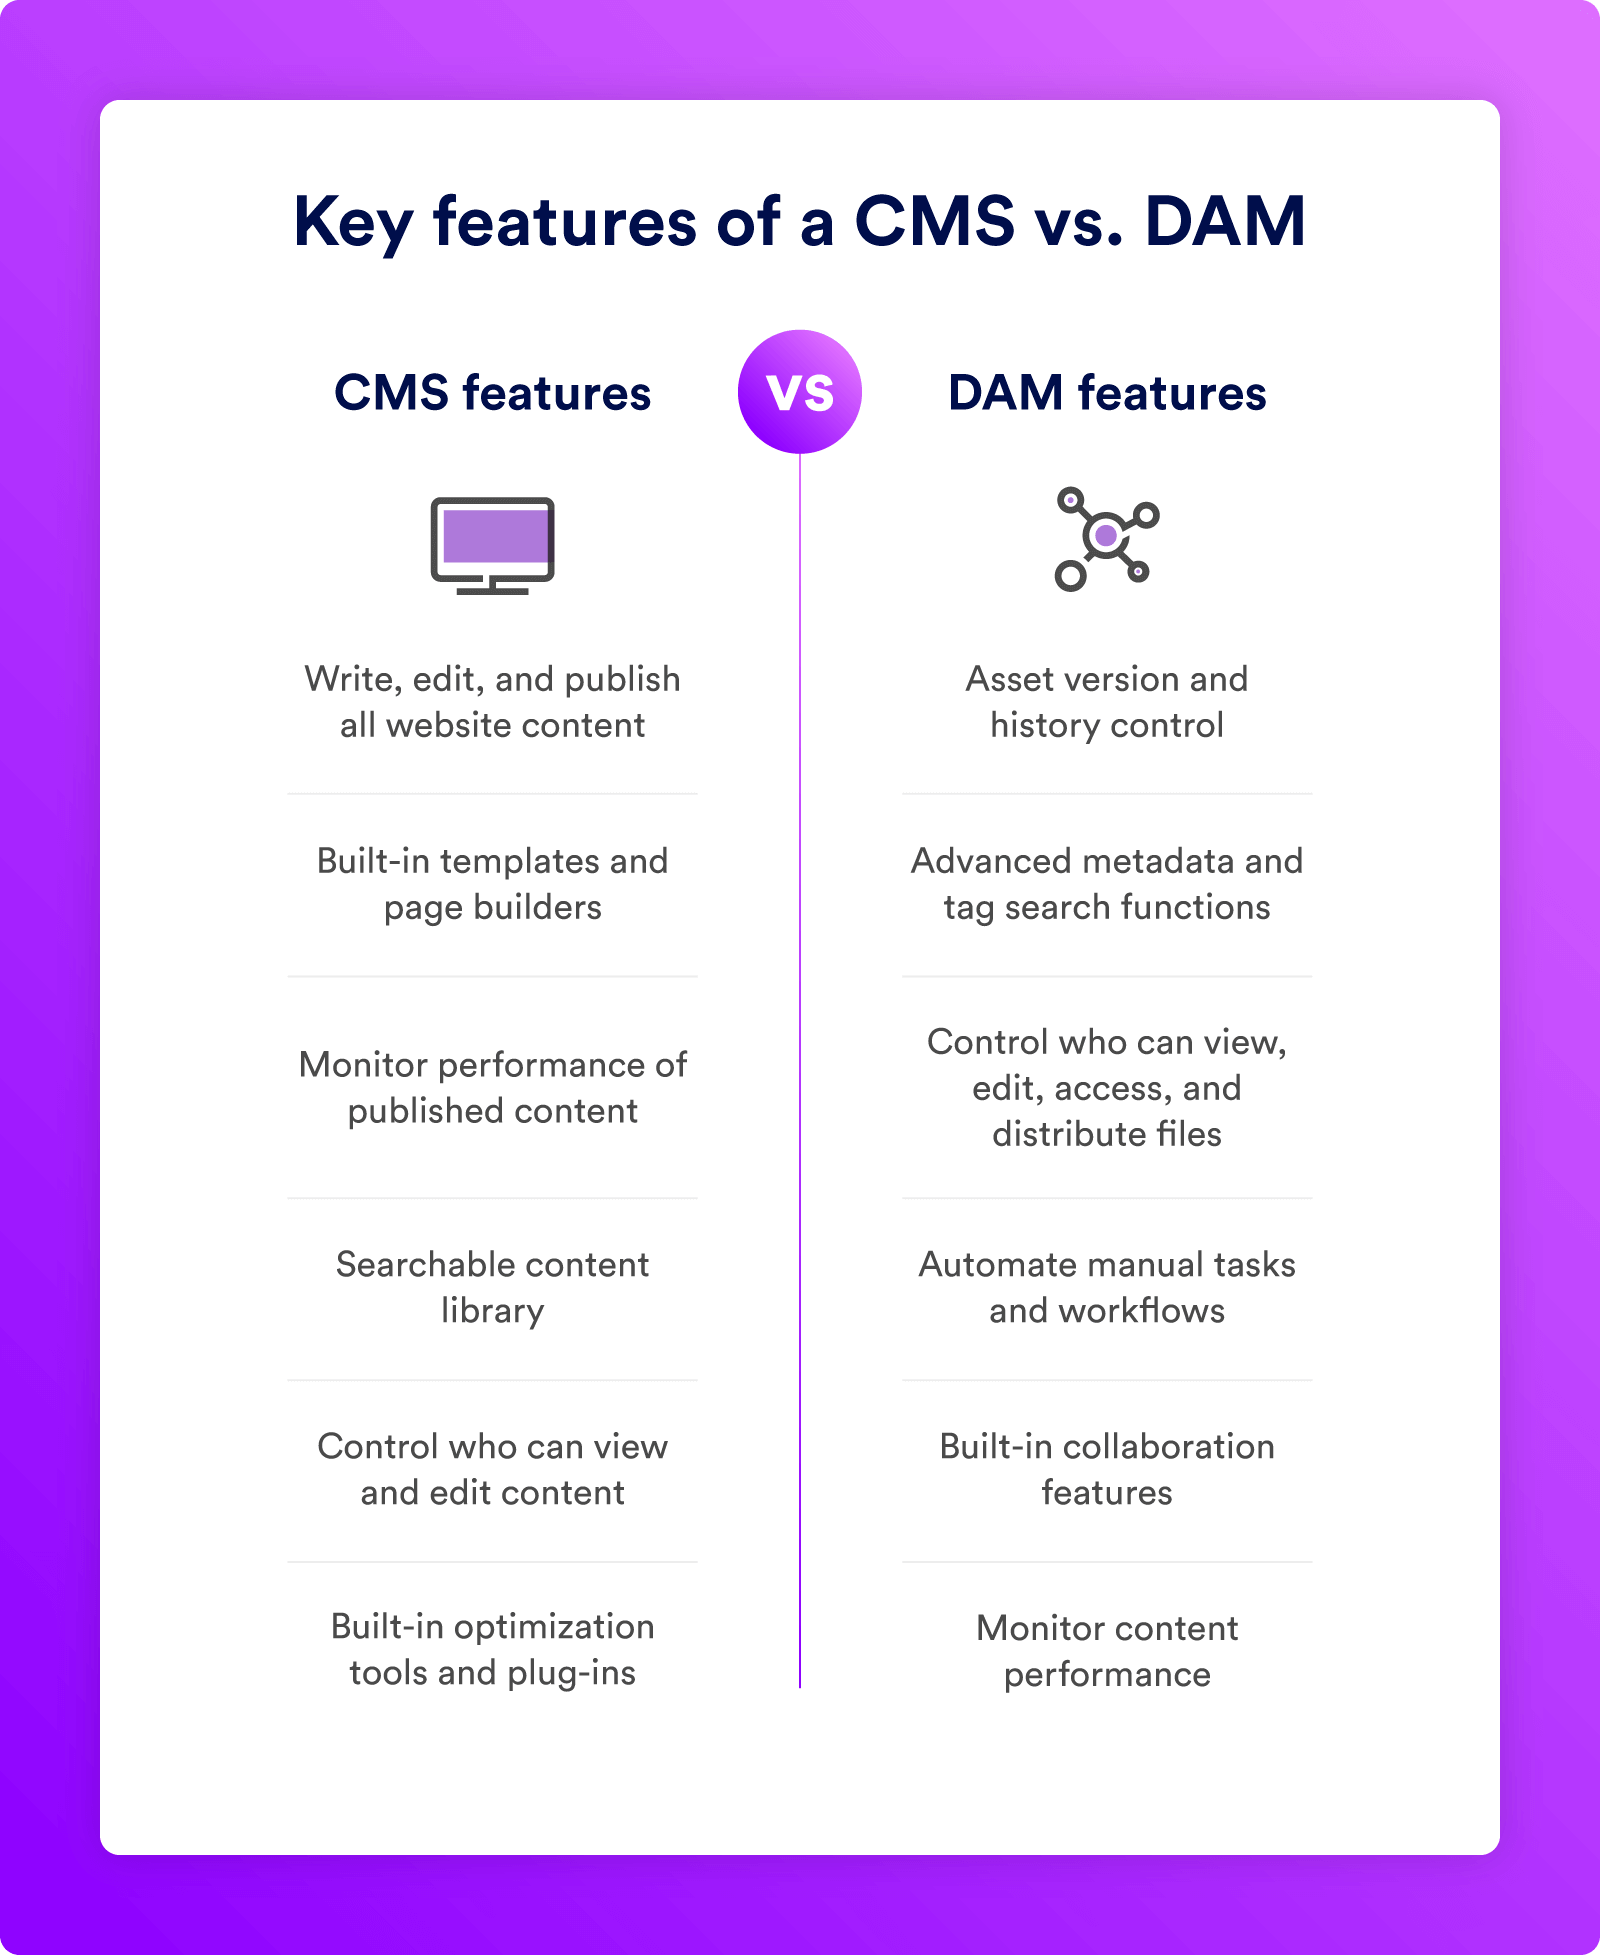 The key features of a CMS vs. DAM